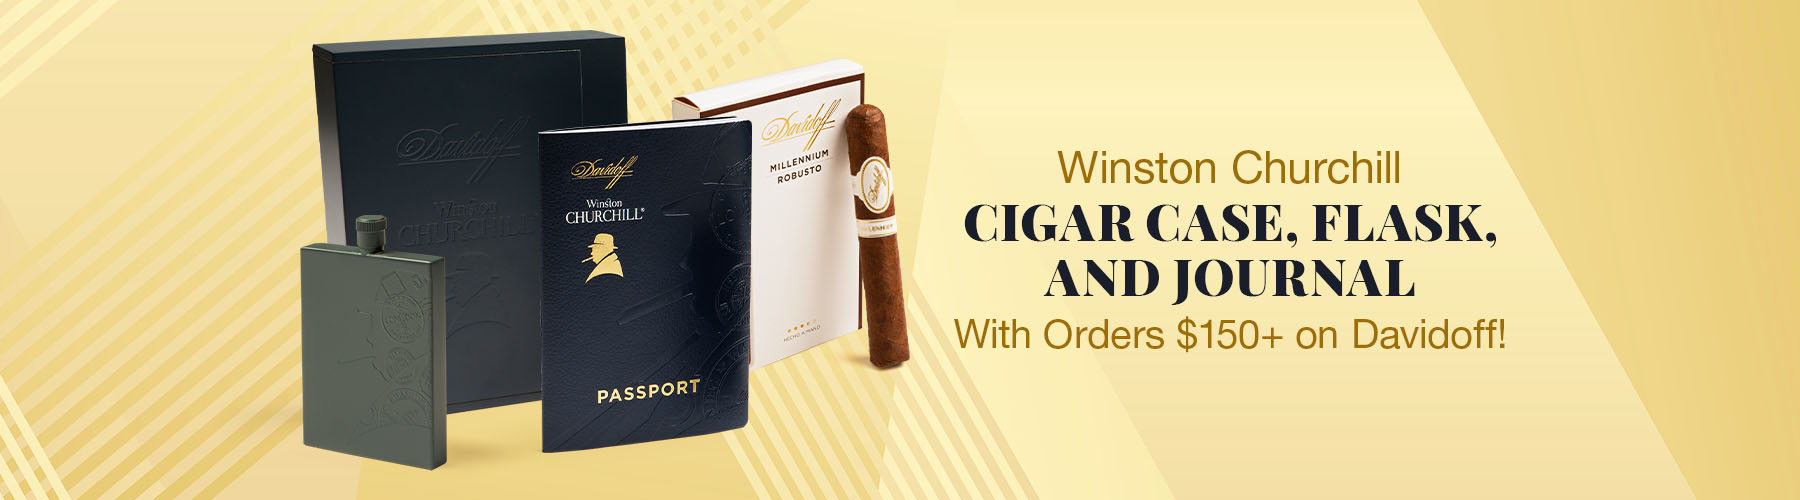 Winston Churchill Cigar Case, Flask, & Journal with orders $150+ on Davidoff!